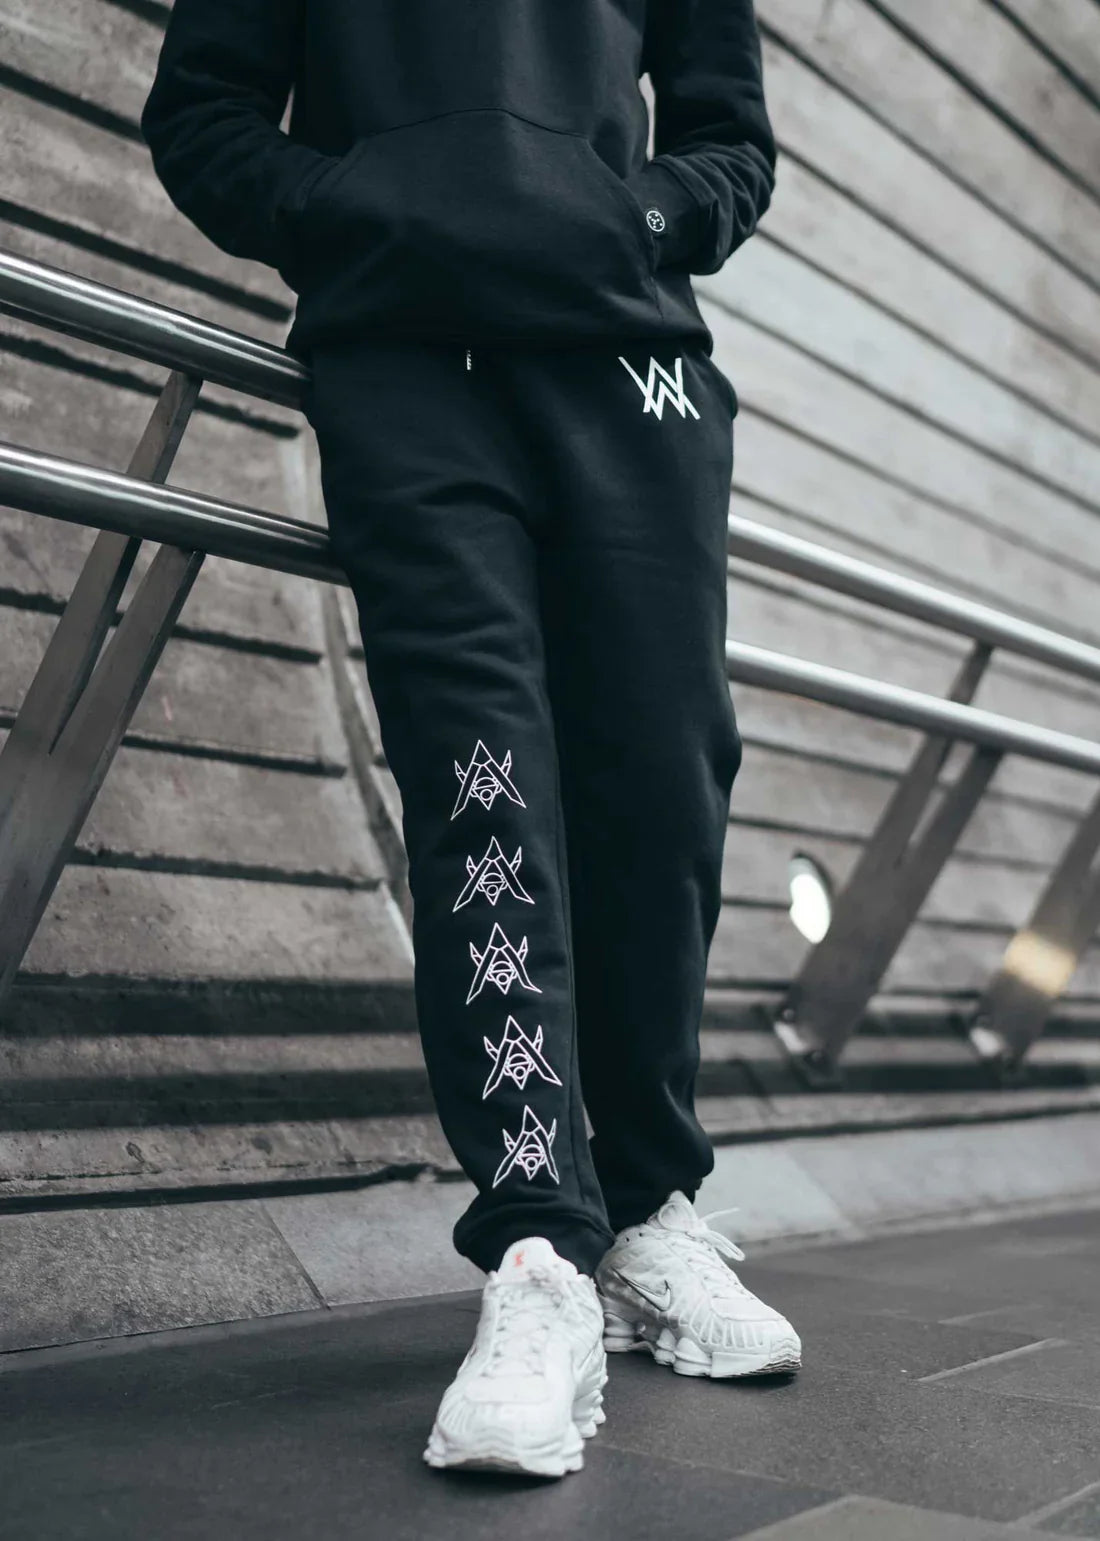 Person posed on stairs wearing Alan Walker Core Drone Sweatpants with distinctive white drone graphics down the right leg and a classic 'AW' logo on the left hip, paired with white sneakers for a casual urban look.